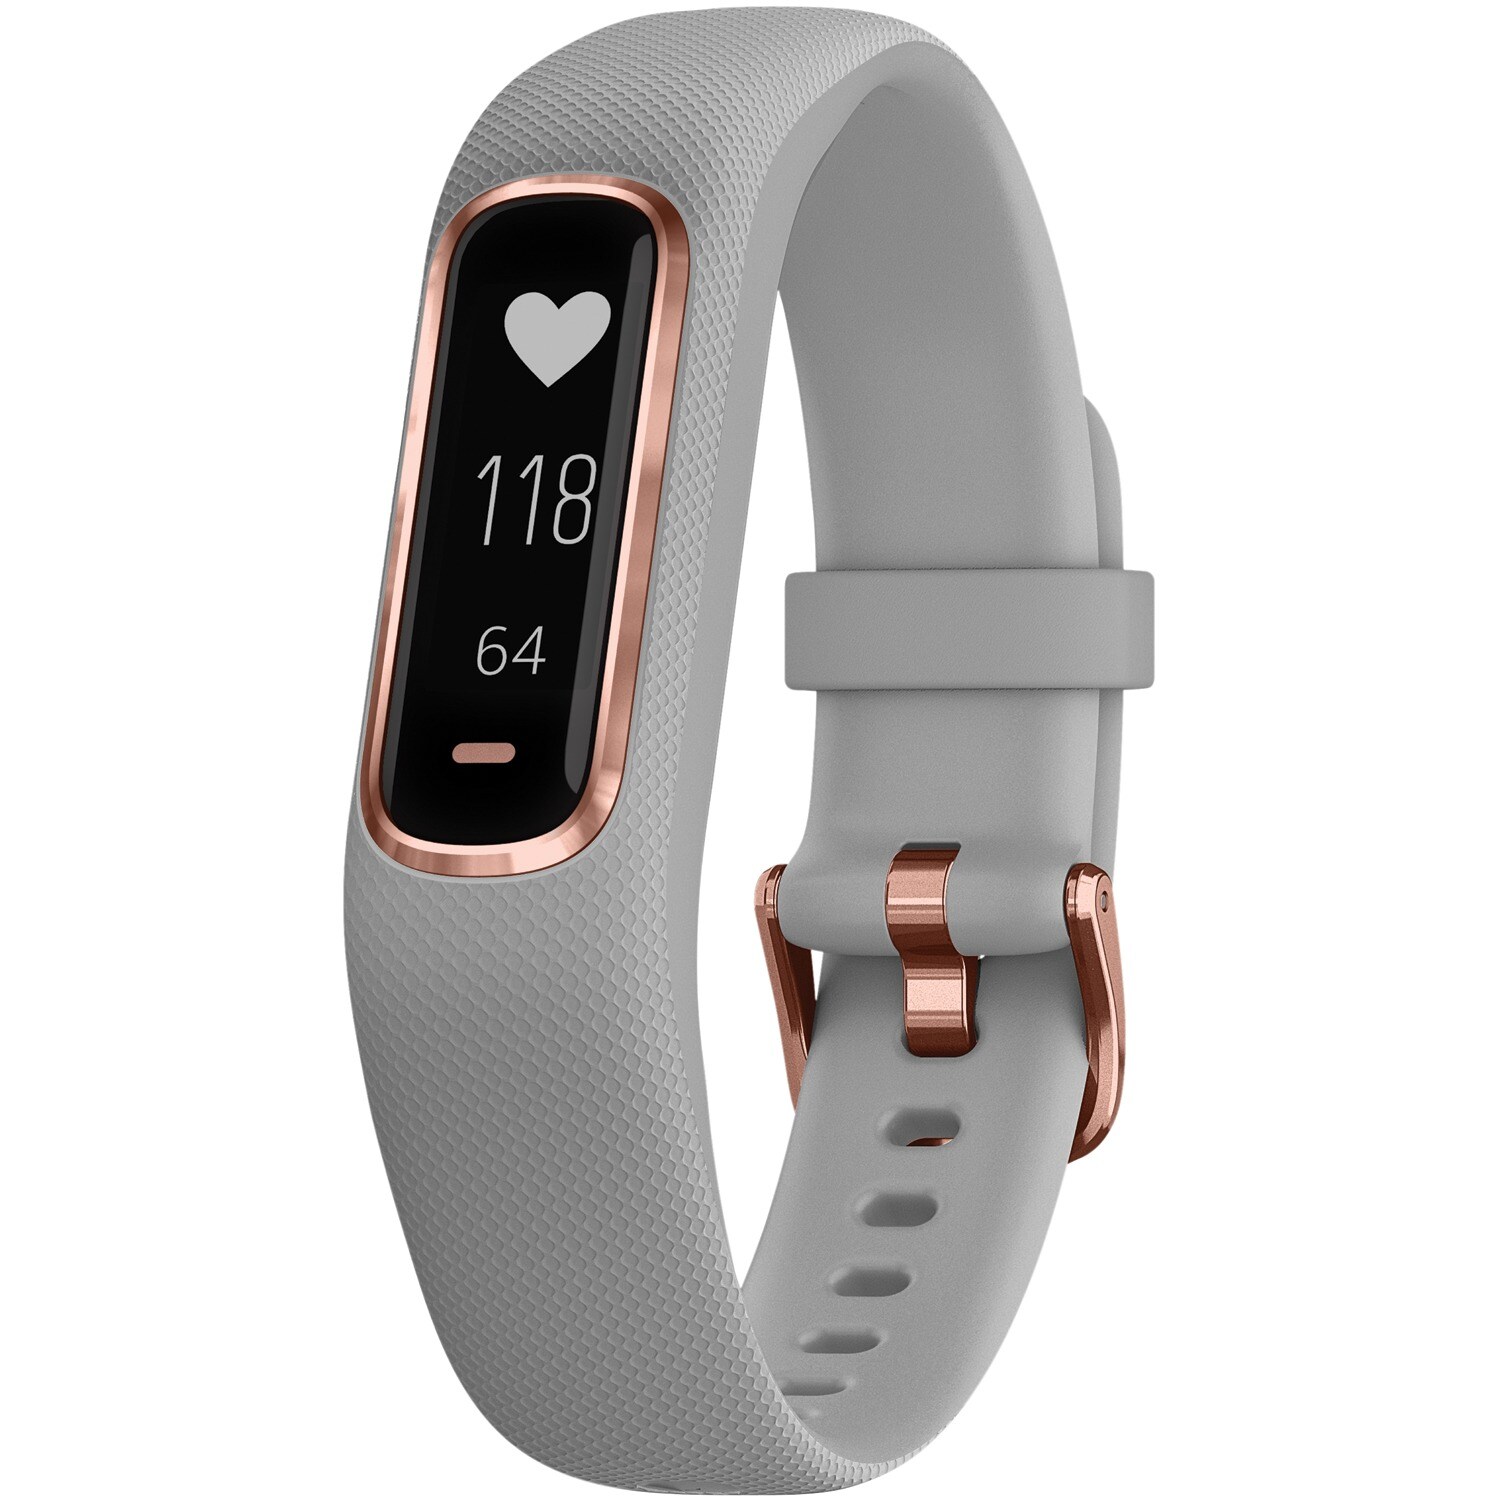 Garmin Vivosmart 4 Fitness Tracker with Step Counter, Heart Rate and Enabled at Lowes.com